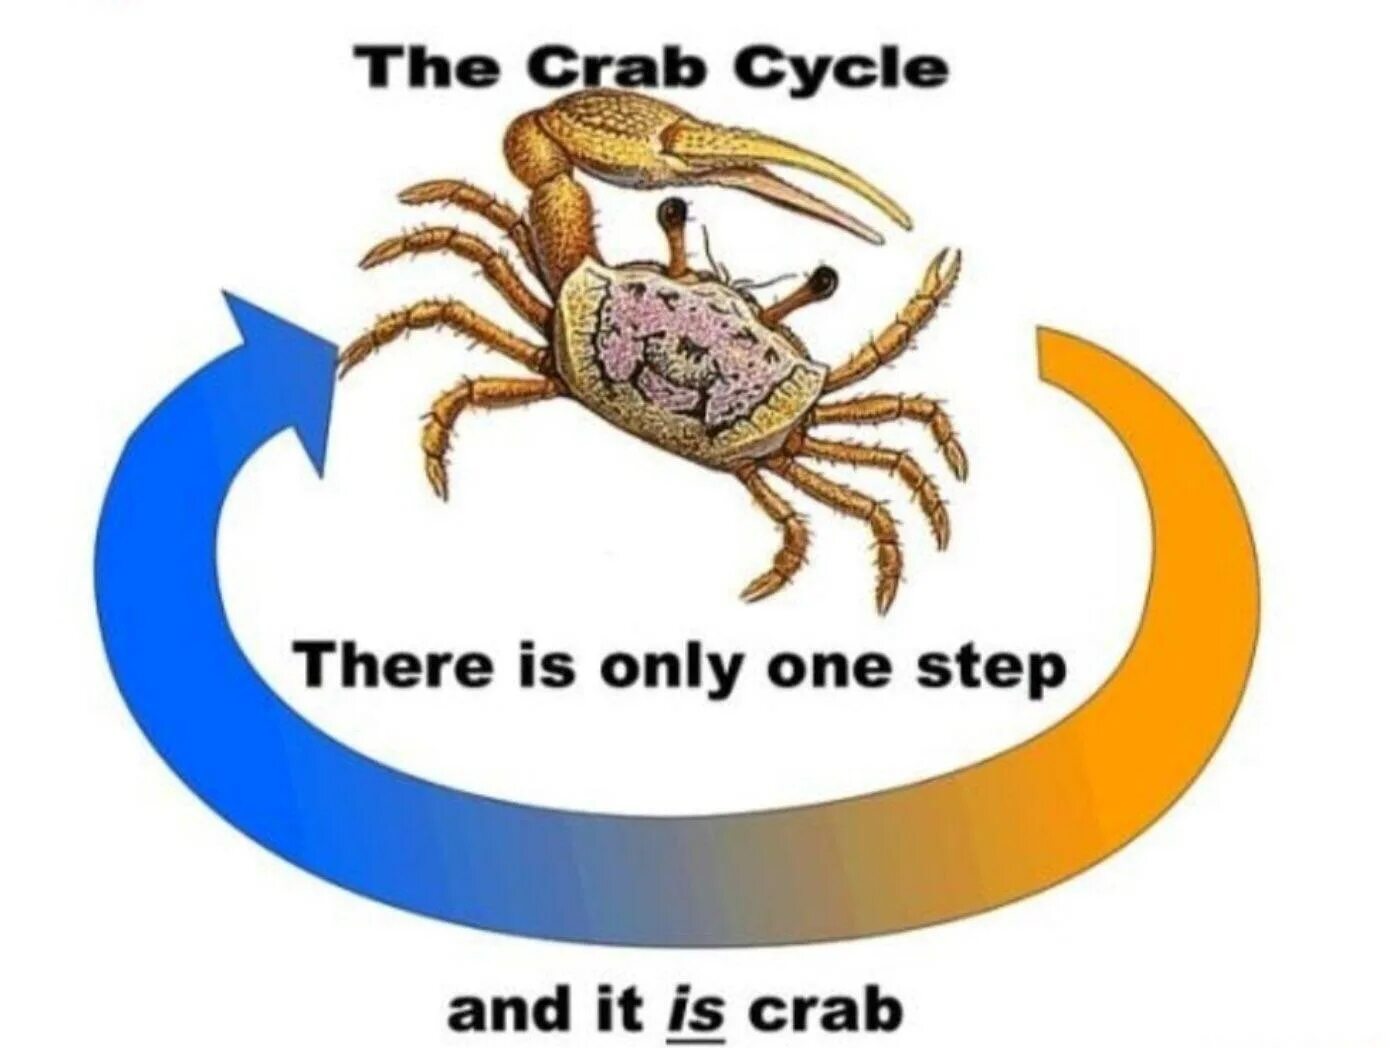 Our is not the only life form. Мемы с крабами. Спай краб. Краб Мем. Crab Cycle there is only i Step.